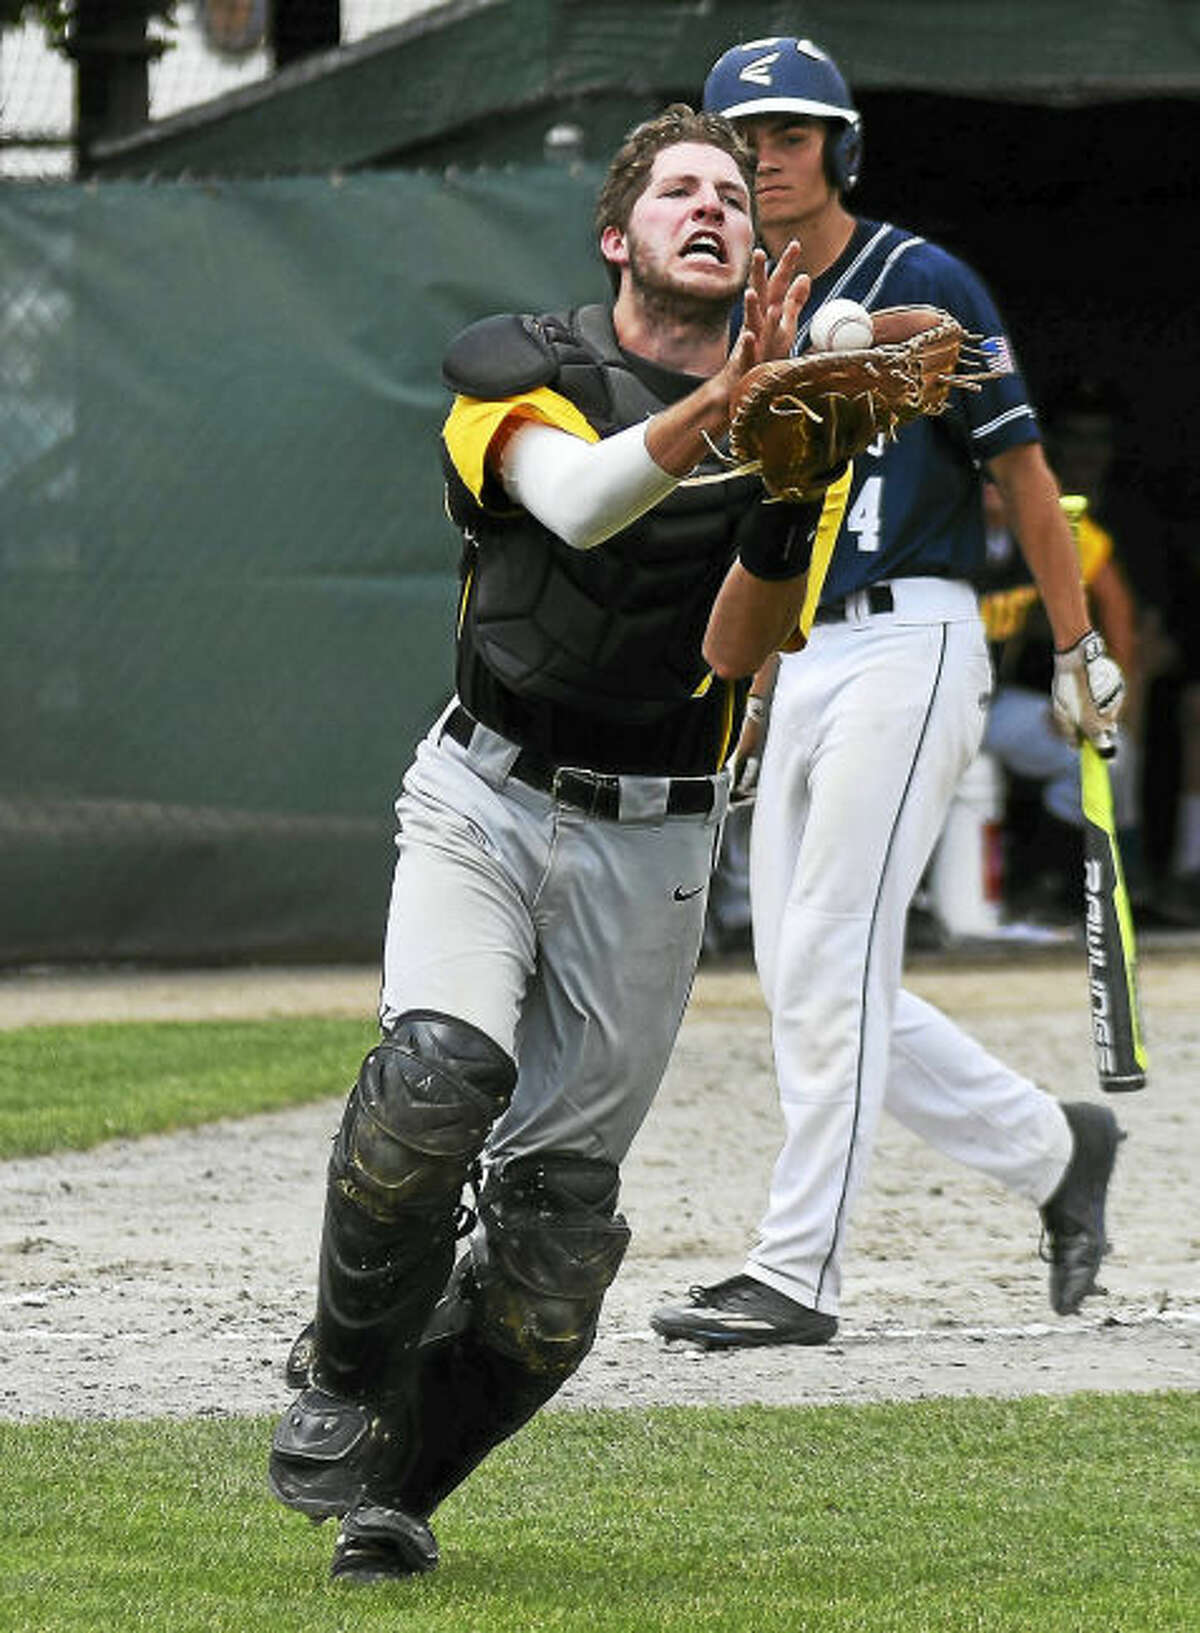 Amity catcher Pat Winkel extends to catch a pop up bunt by Staples’ Max Popken during Saturday’s Class LL championship game in Middletown.